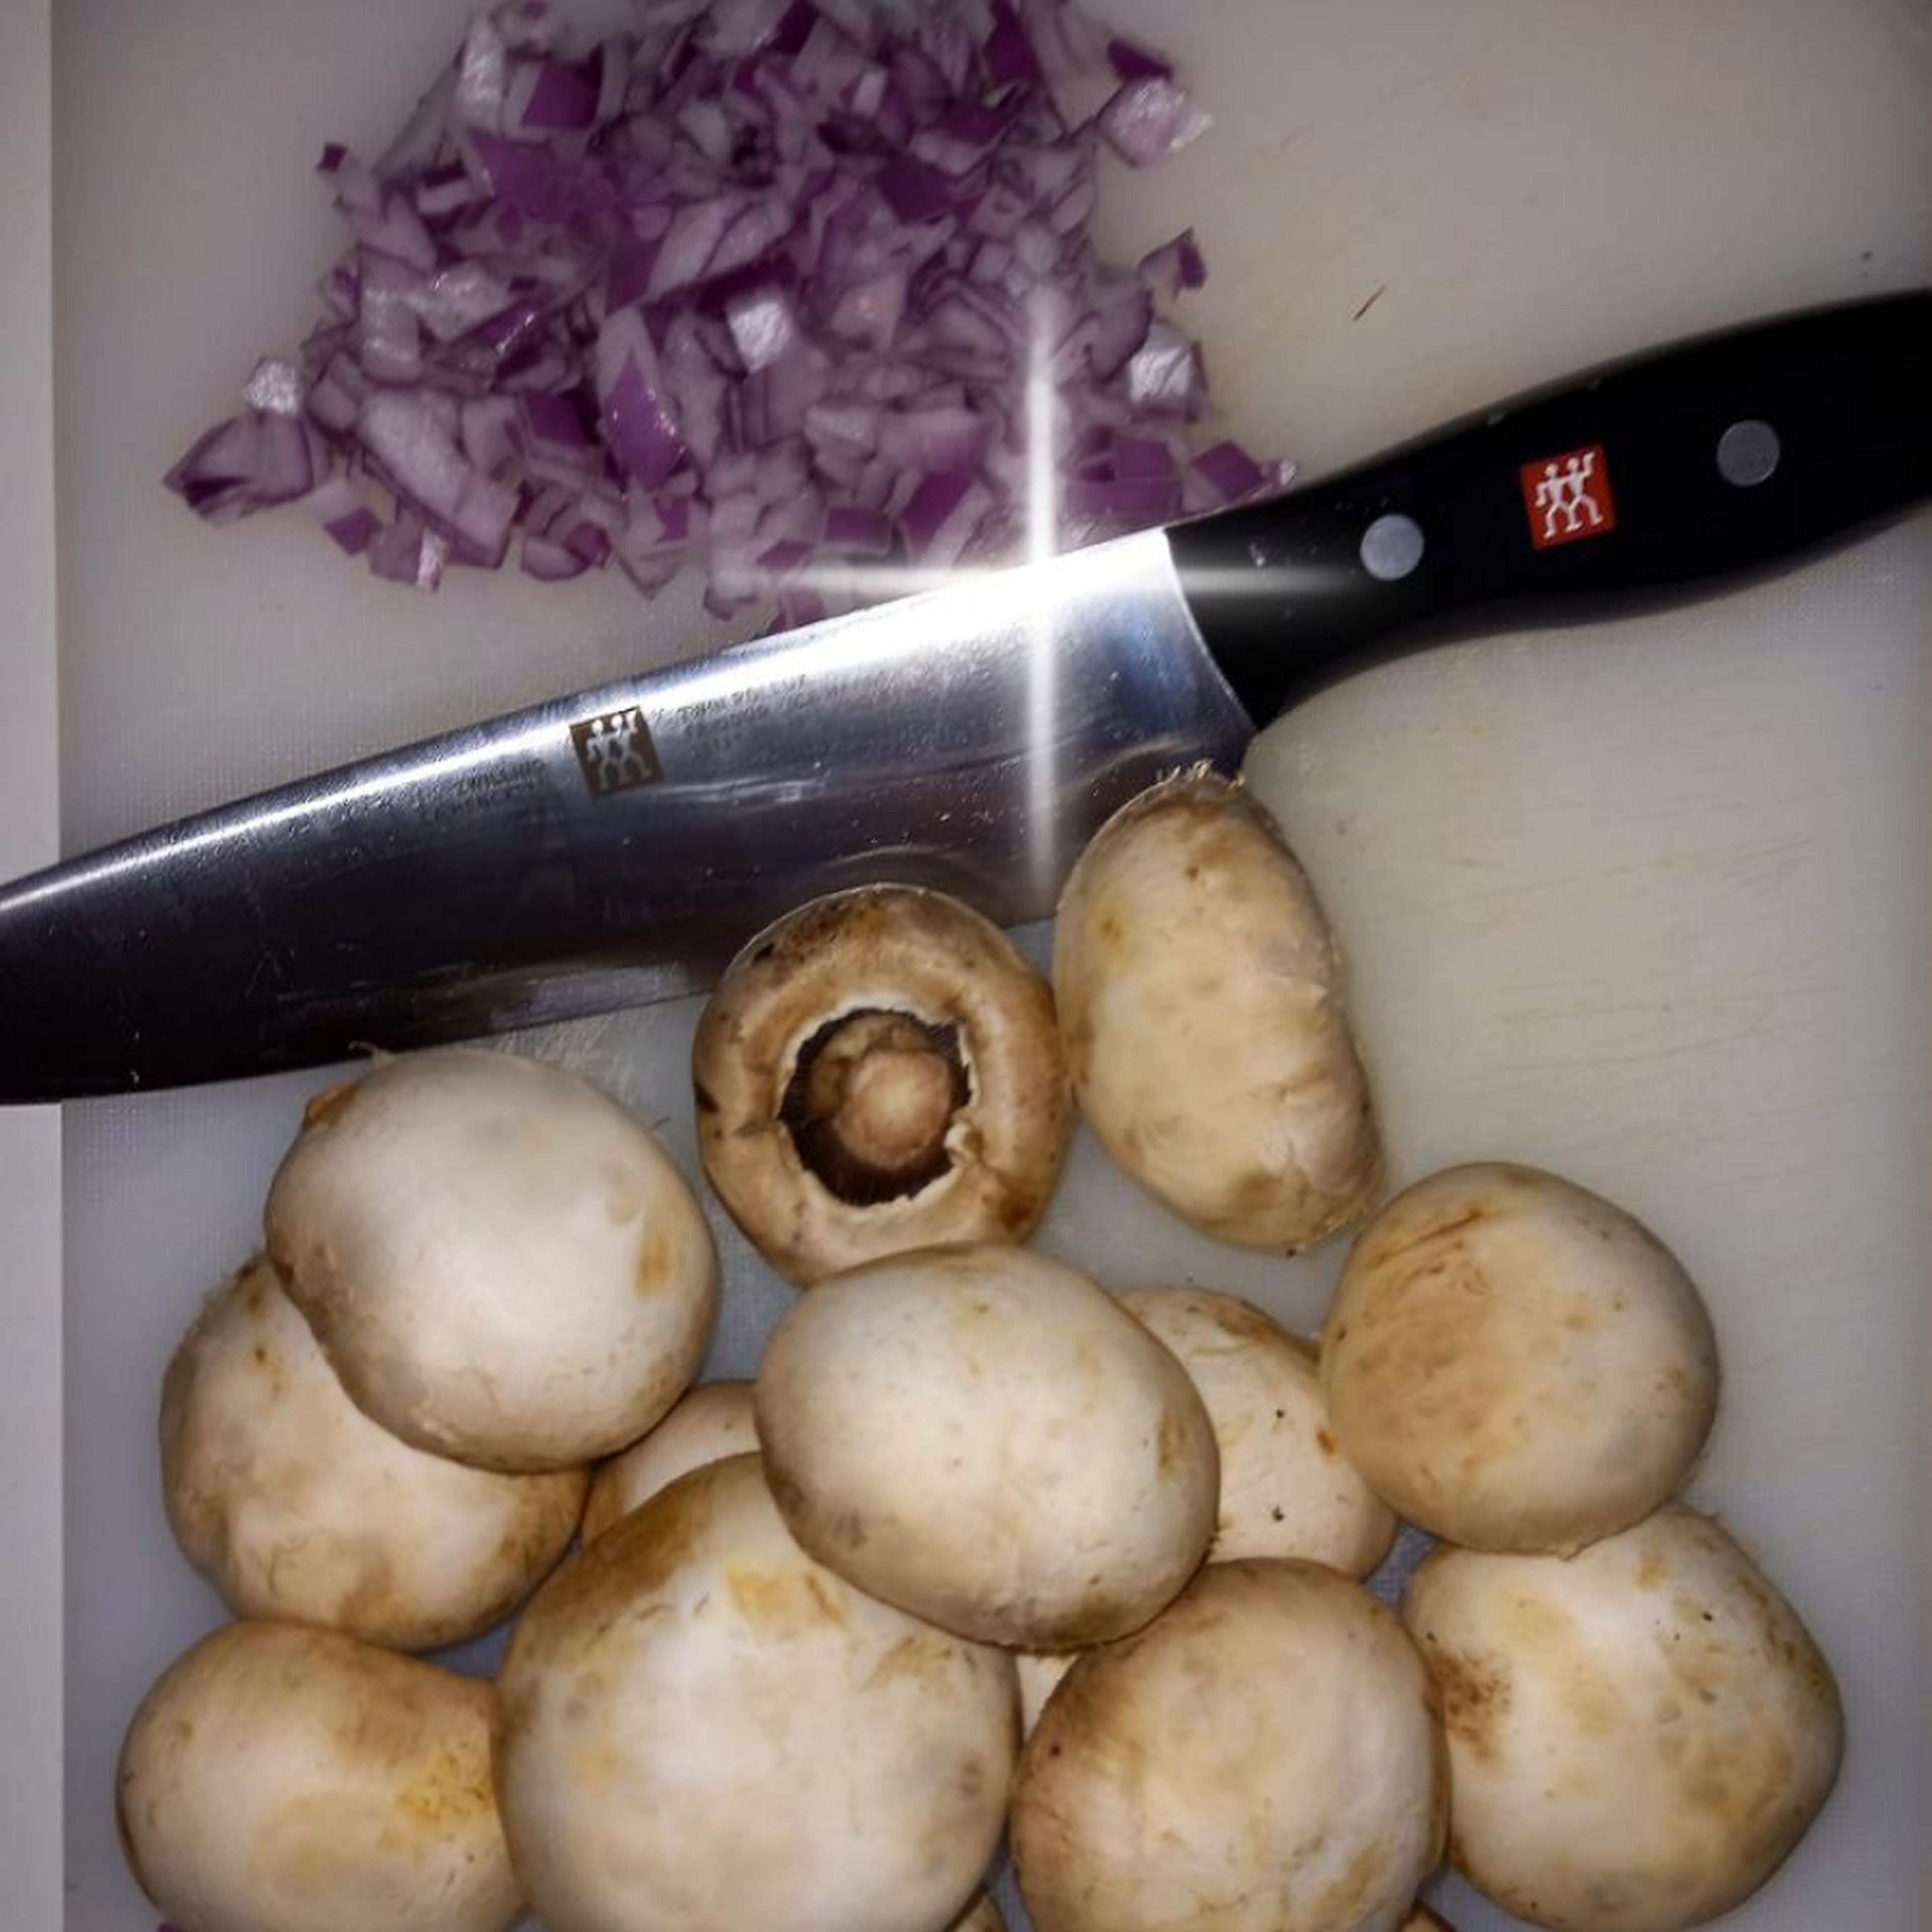 Cut the fresh mushrooms into pieces. Dice the shallot. Place the dried mushrooms in warm water and let soak.